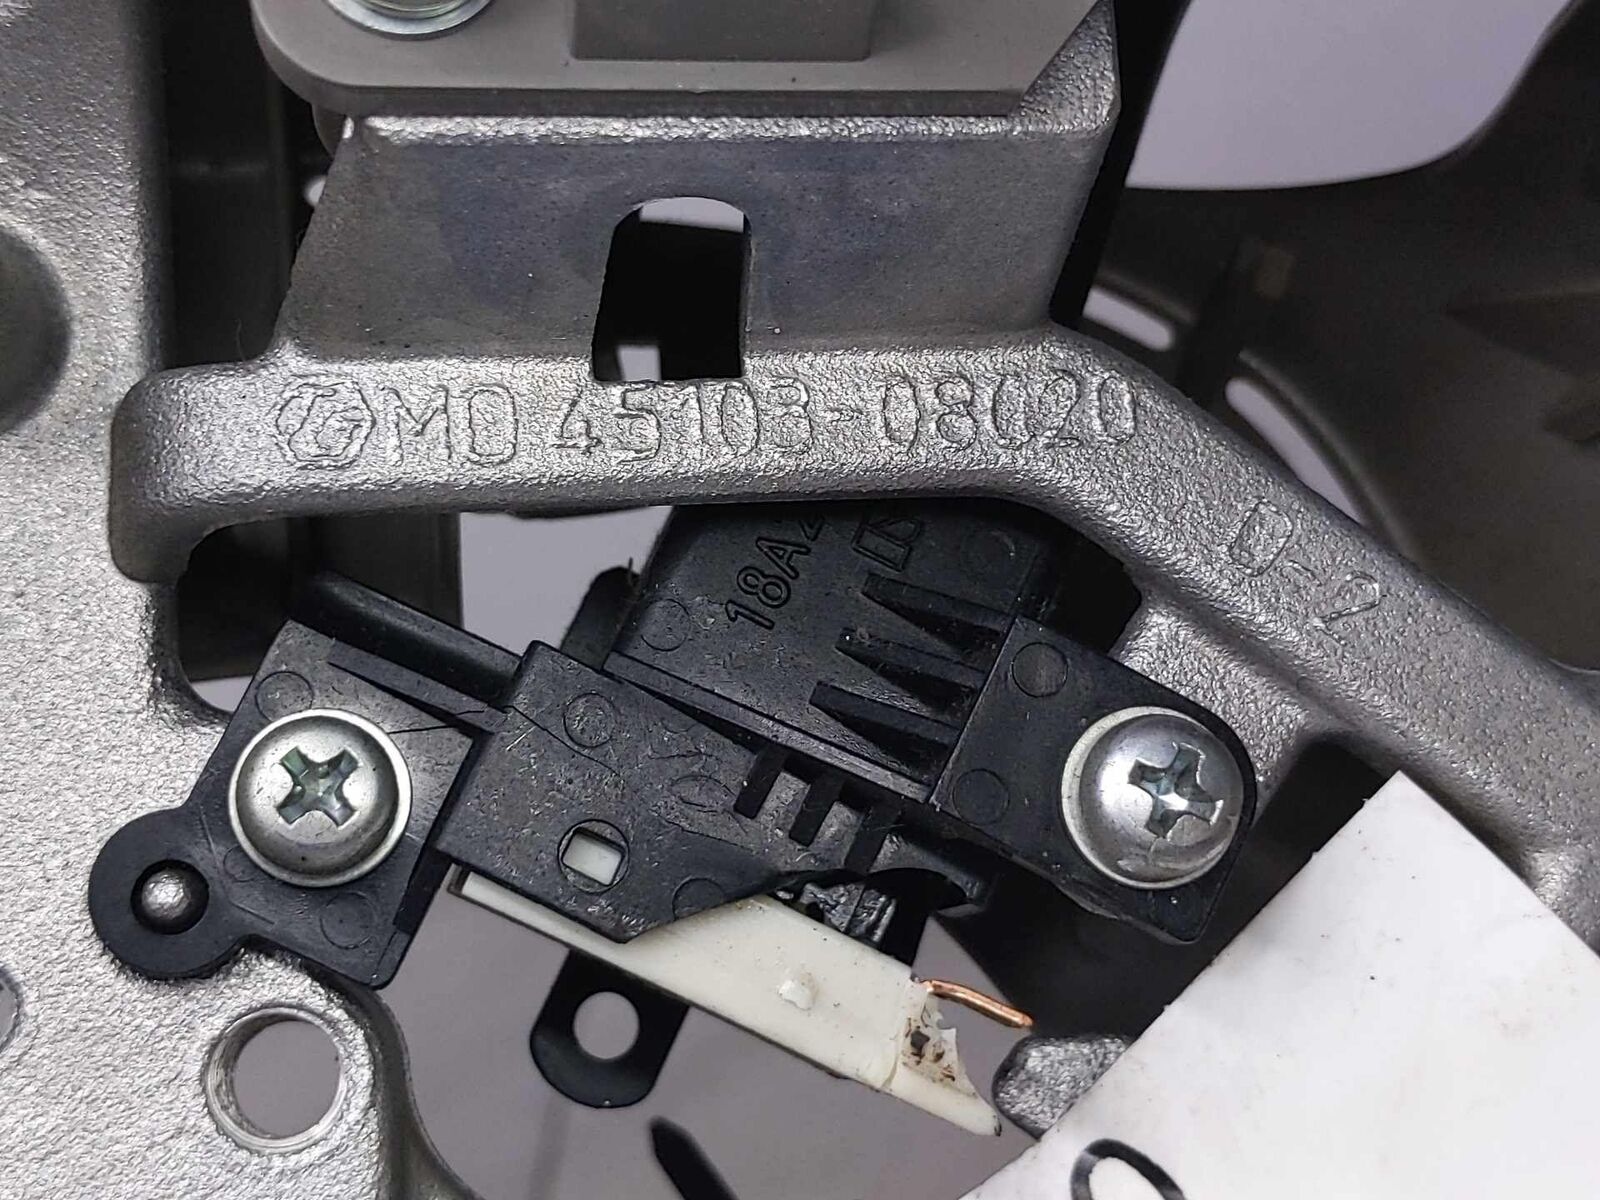 Steering Wheel with Audio Control Switch OEM TOYOTA SIENNA 04 05 06 07 08 09 10